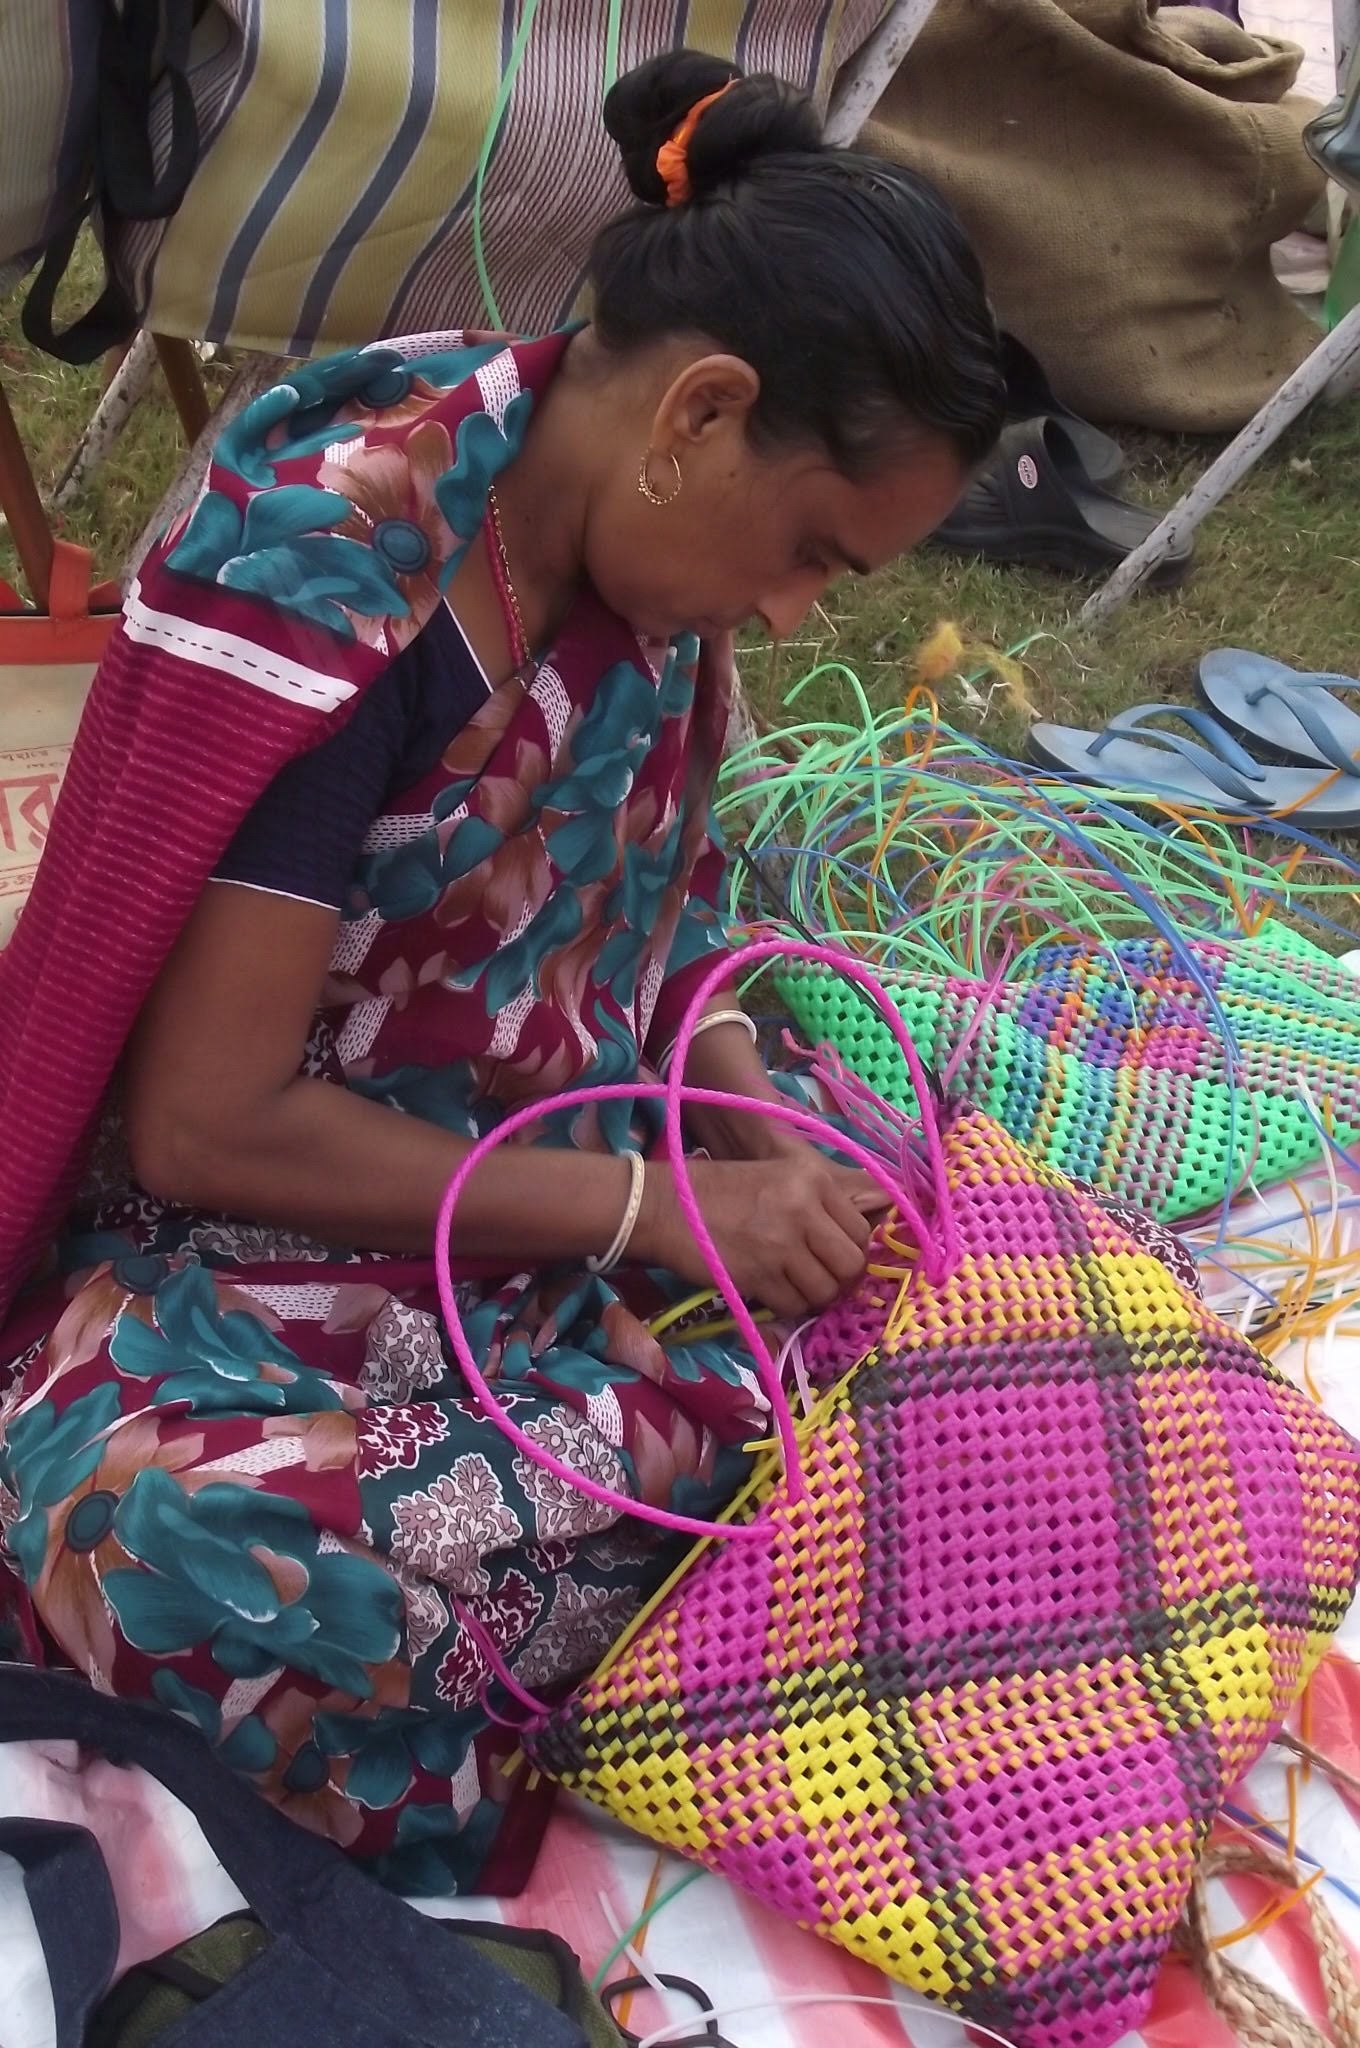 lady sat on grass concentrating on weaving a yellow and pink basket